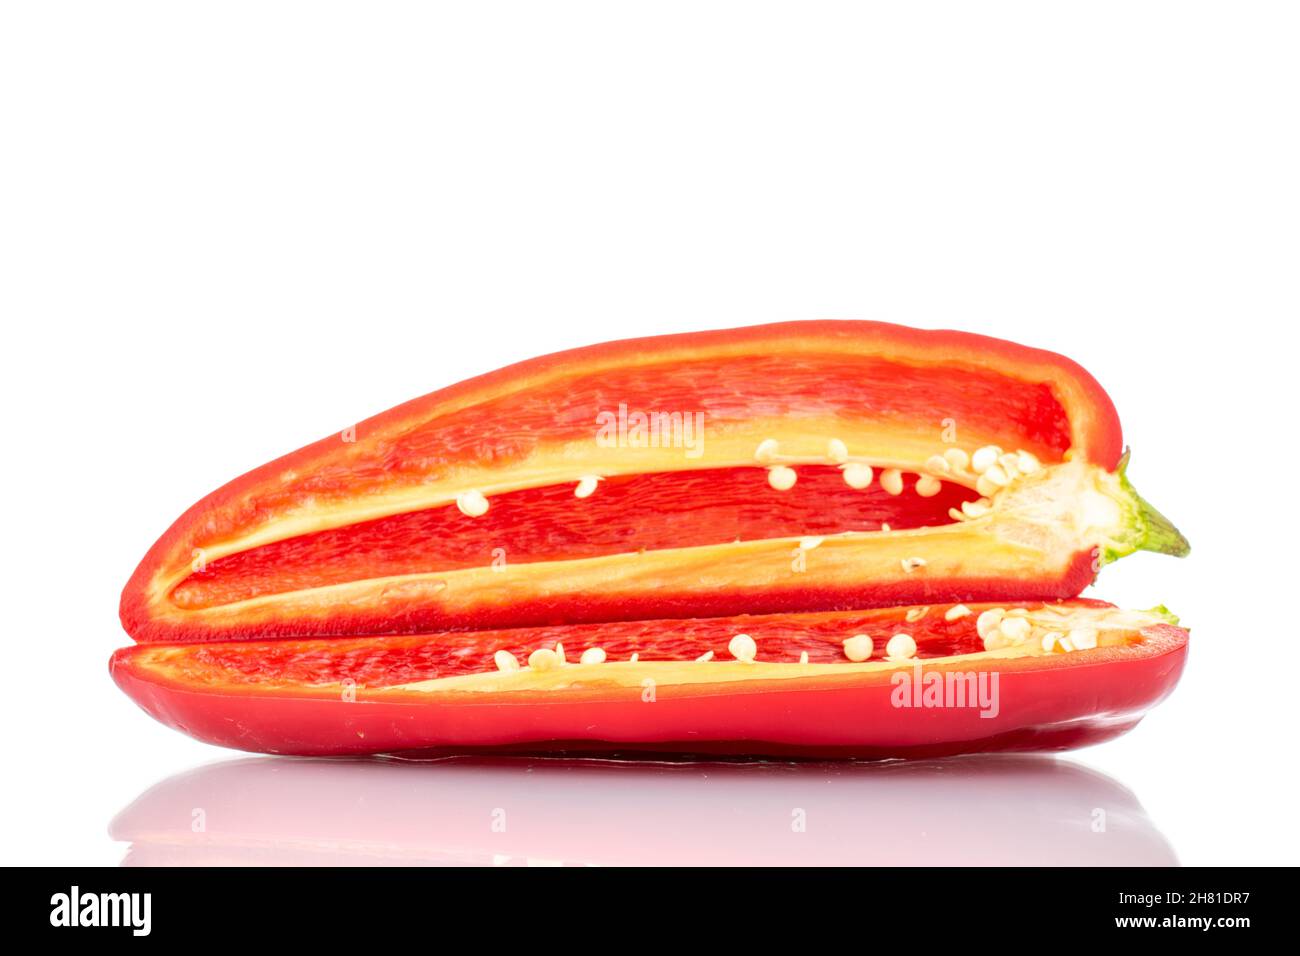 Two halves of red sweet pepper, close-up, isolated on white. Stock Photo